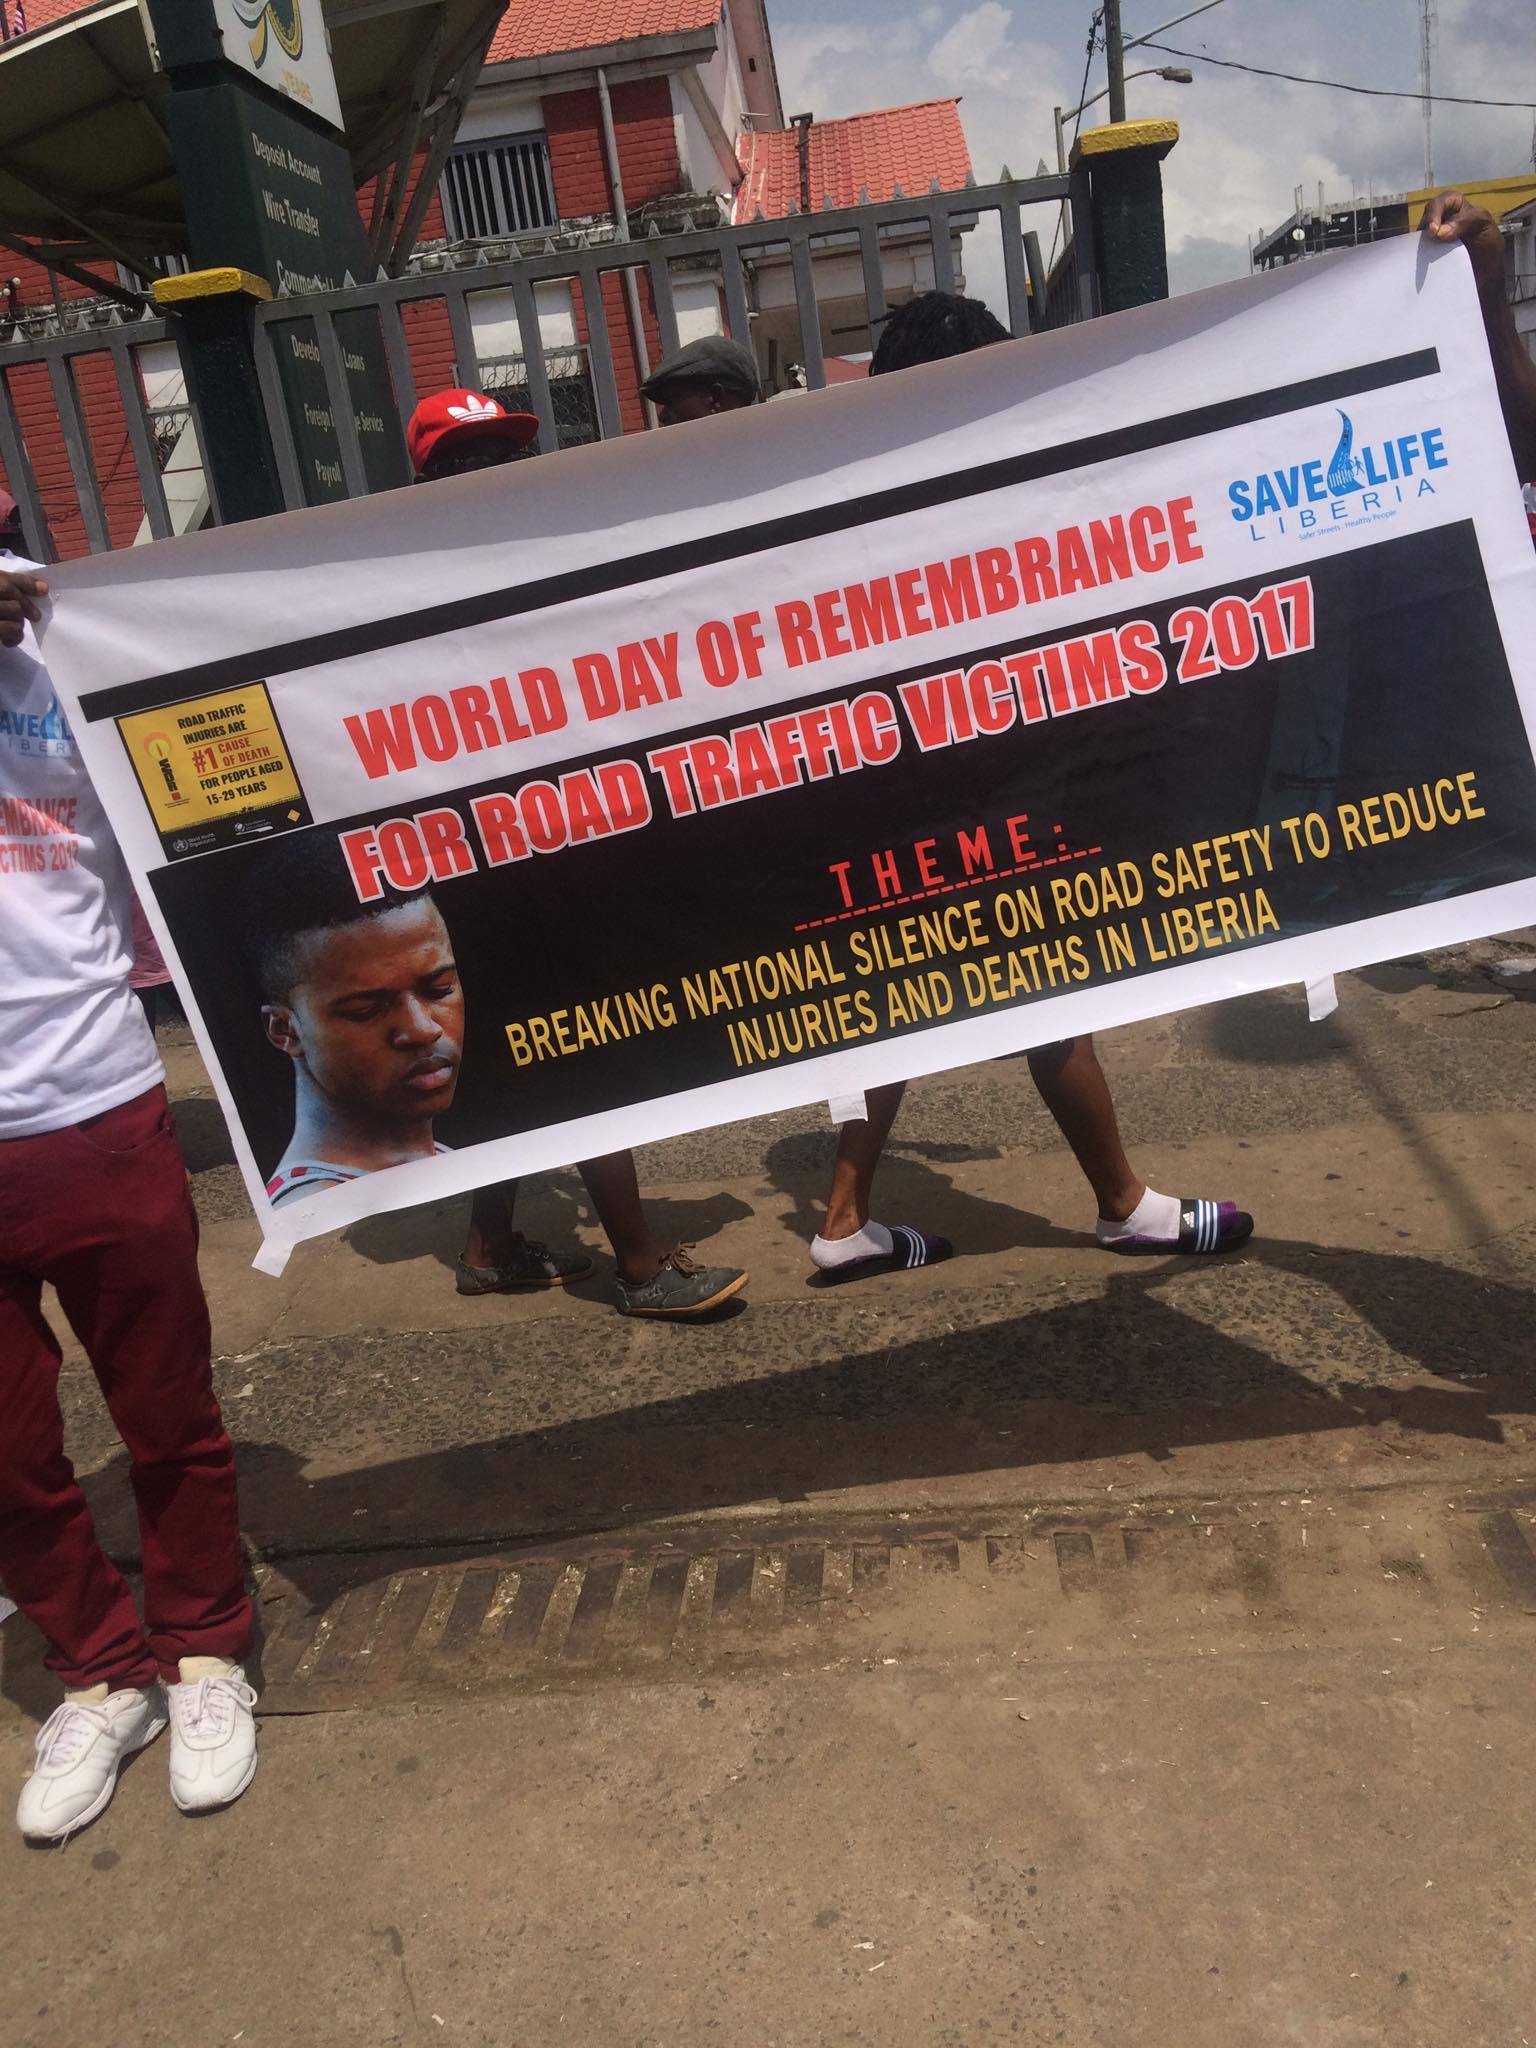 Liberian Popular Music Star Remembered at WDoR - Global Alliance of NGOs for Road Safety1536 x 2048